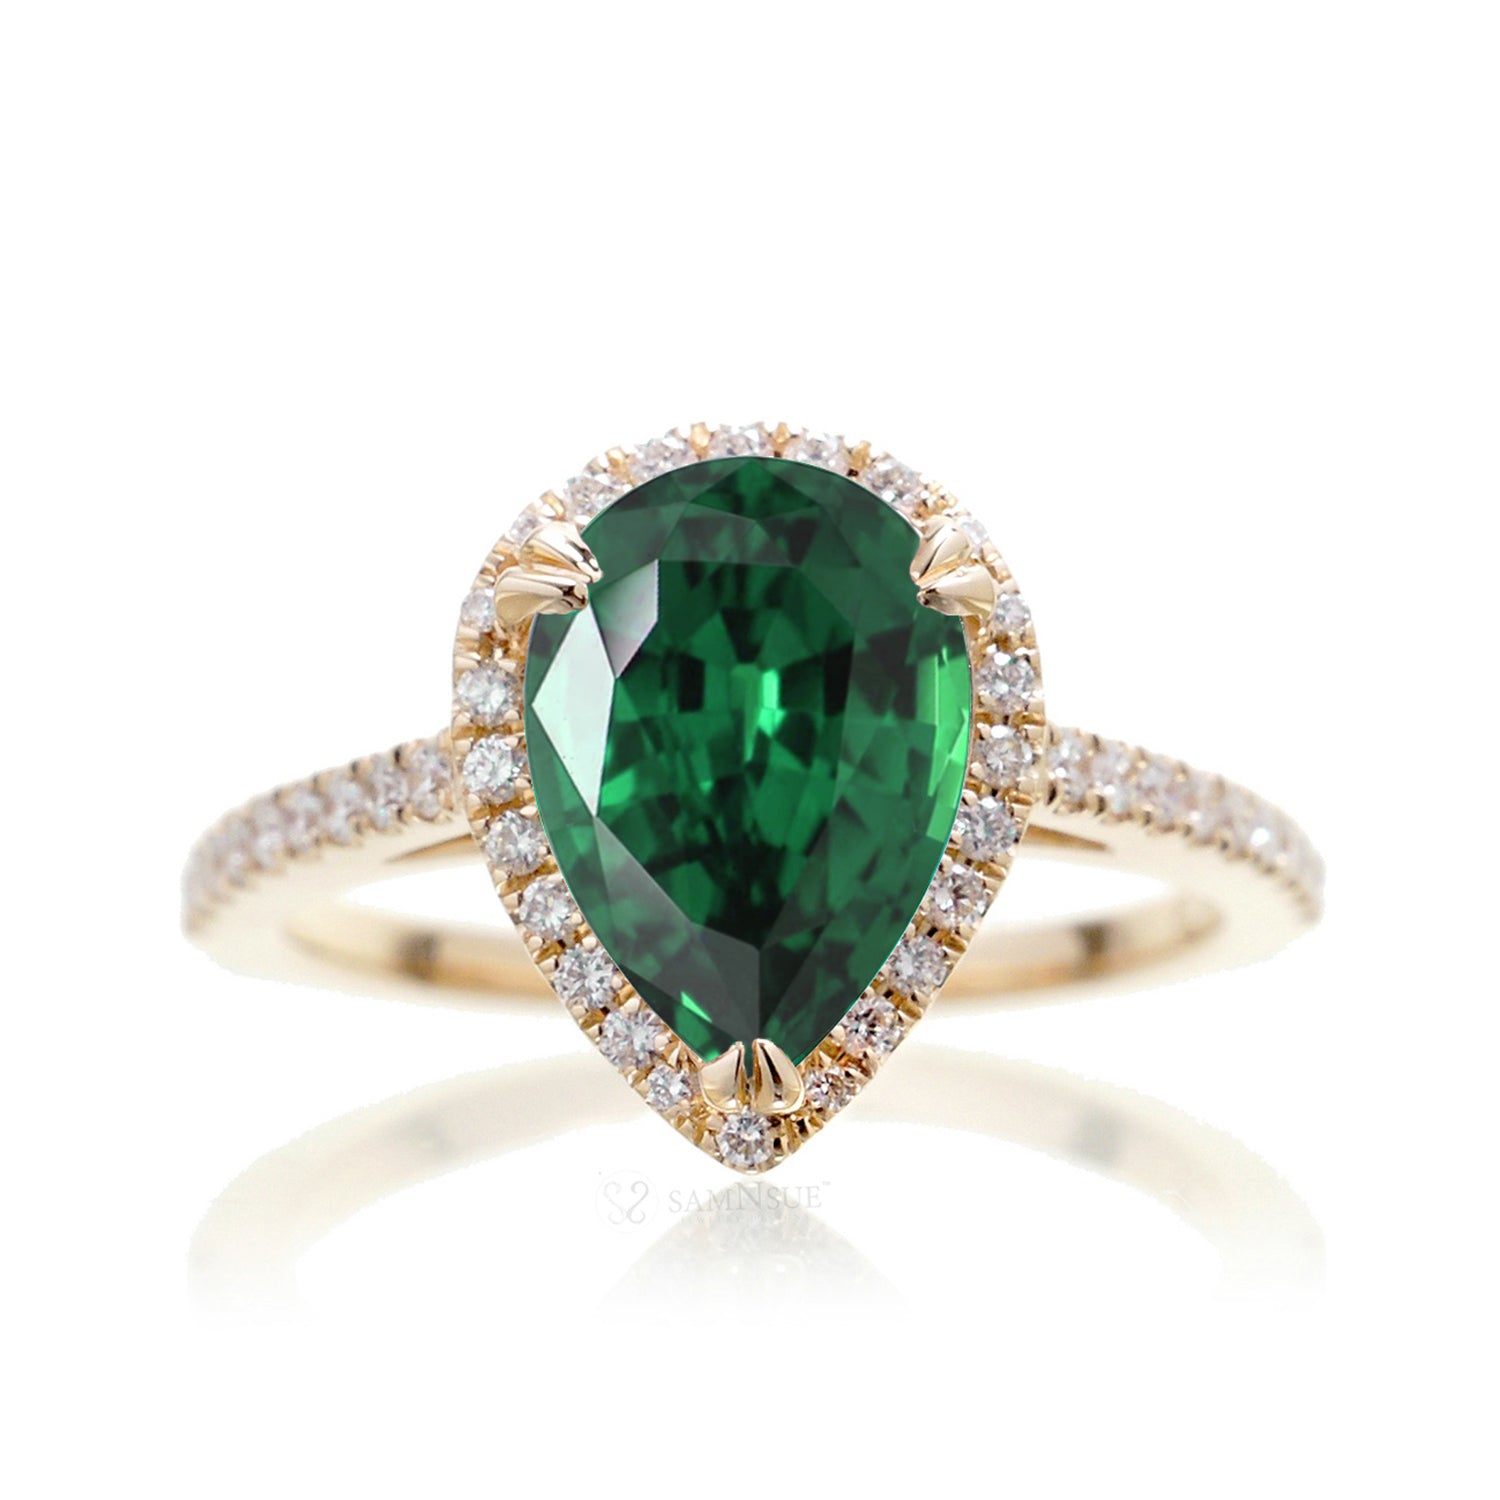 Pear green emerald diamond halo cathedral engagement ring yellow gold - The Signature